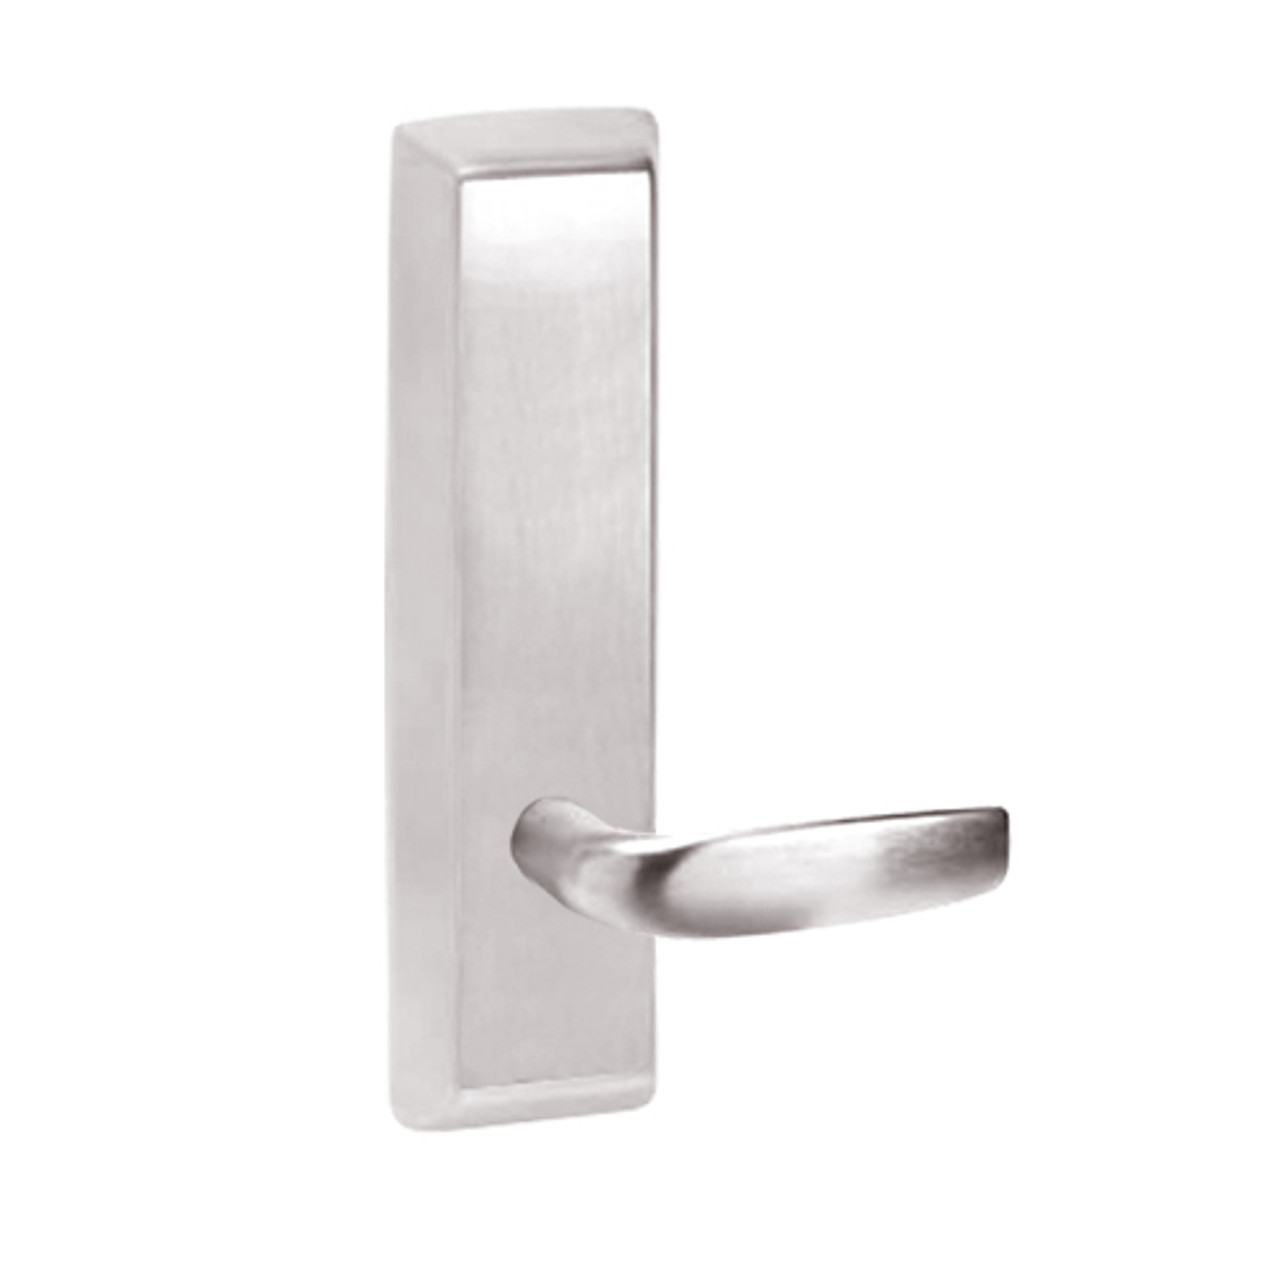 C910-629-RHR Corbin ED5000 Series Exit Device Trim with Passage Citation Lever in Bright Stainless Steel Finish